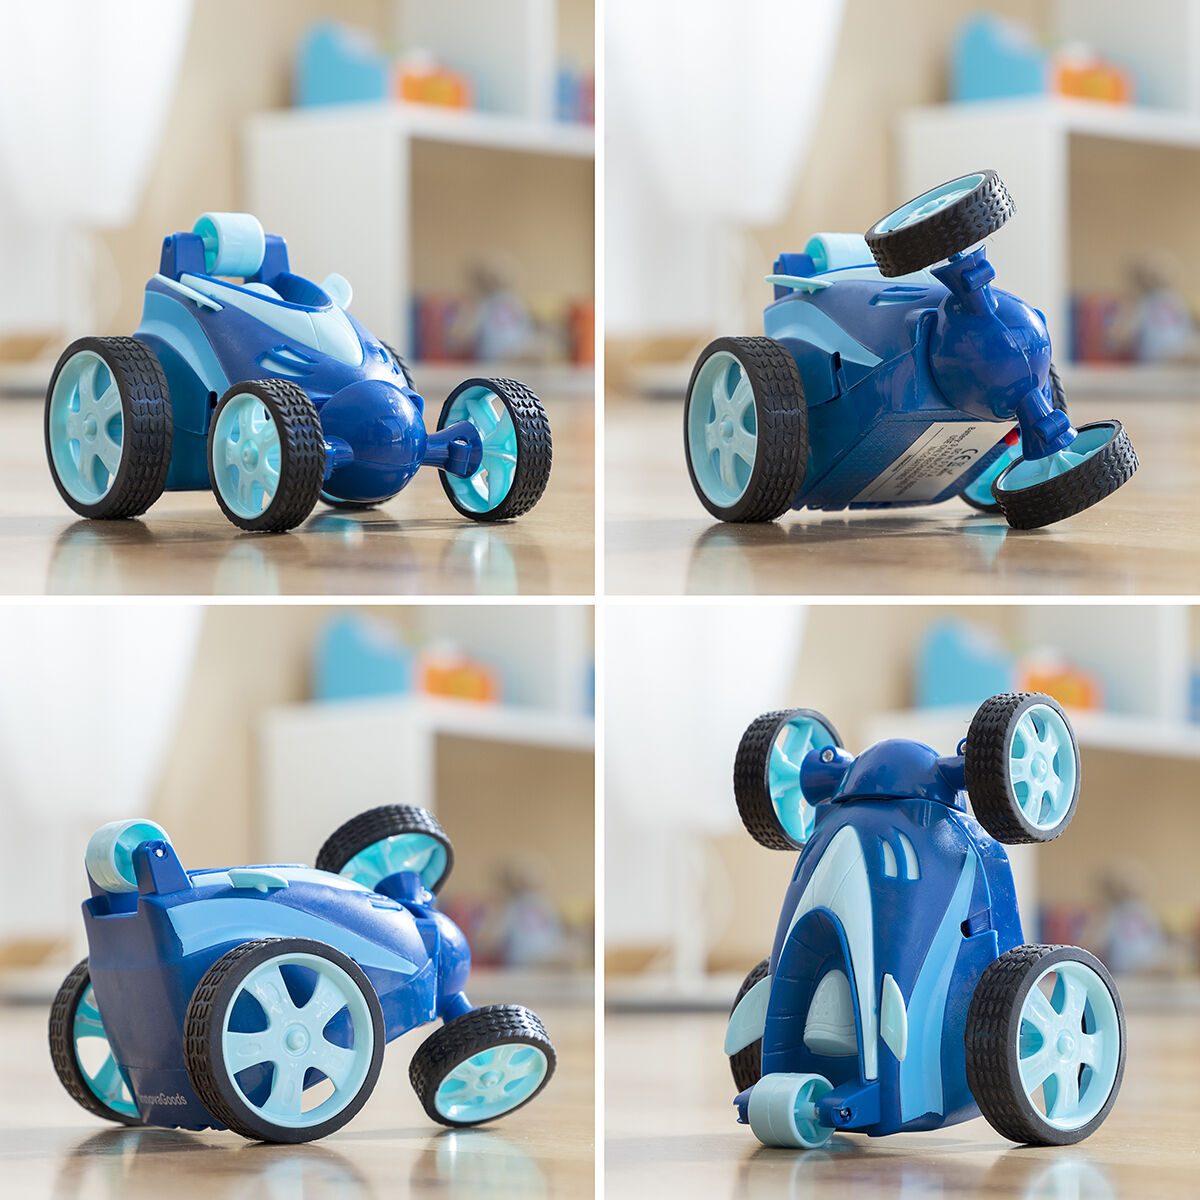 Rechargeable Stunt Car with Remote Control Loopsy InnovaGoods